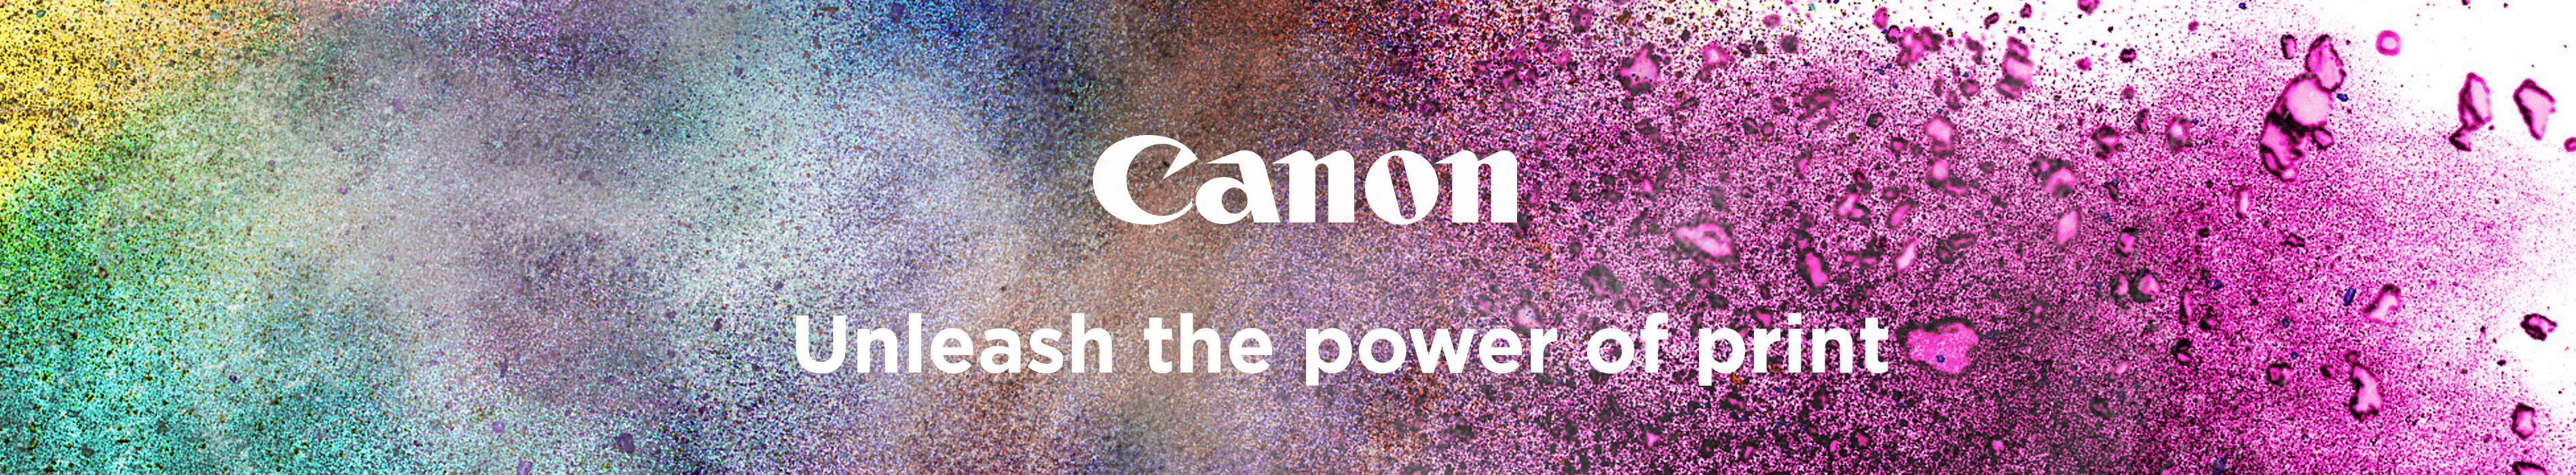 Canon - Unleash the Power of Print